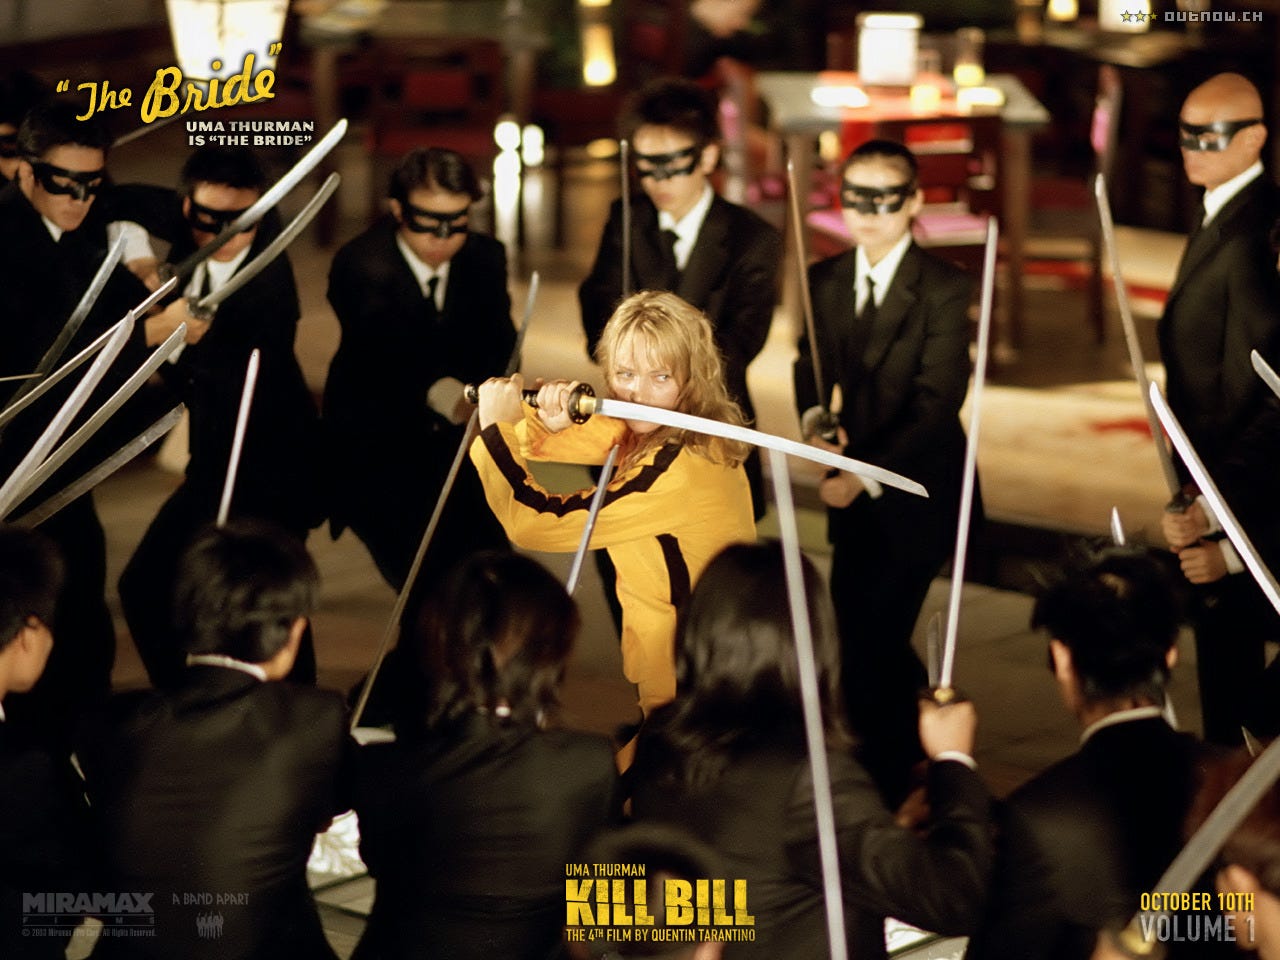 The girl with a fan: KILL BILL with BRIDE'S SWORD